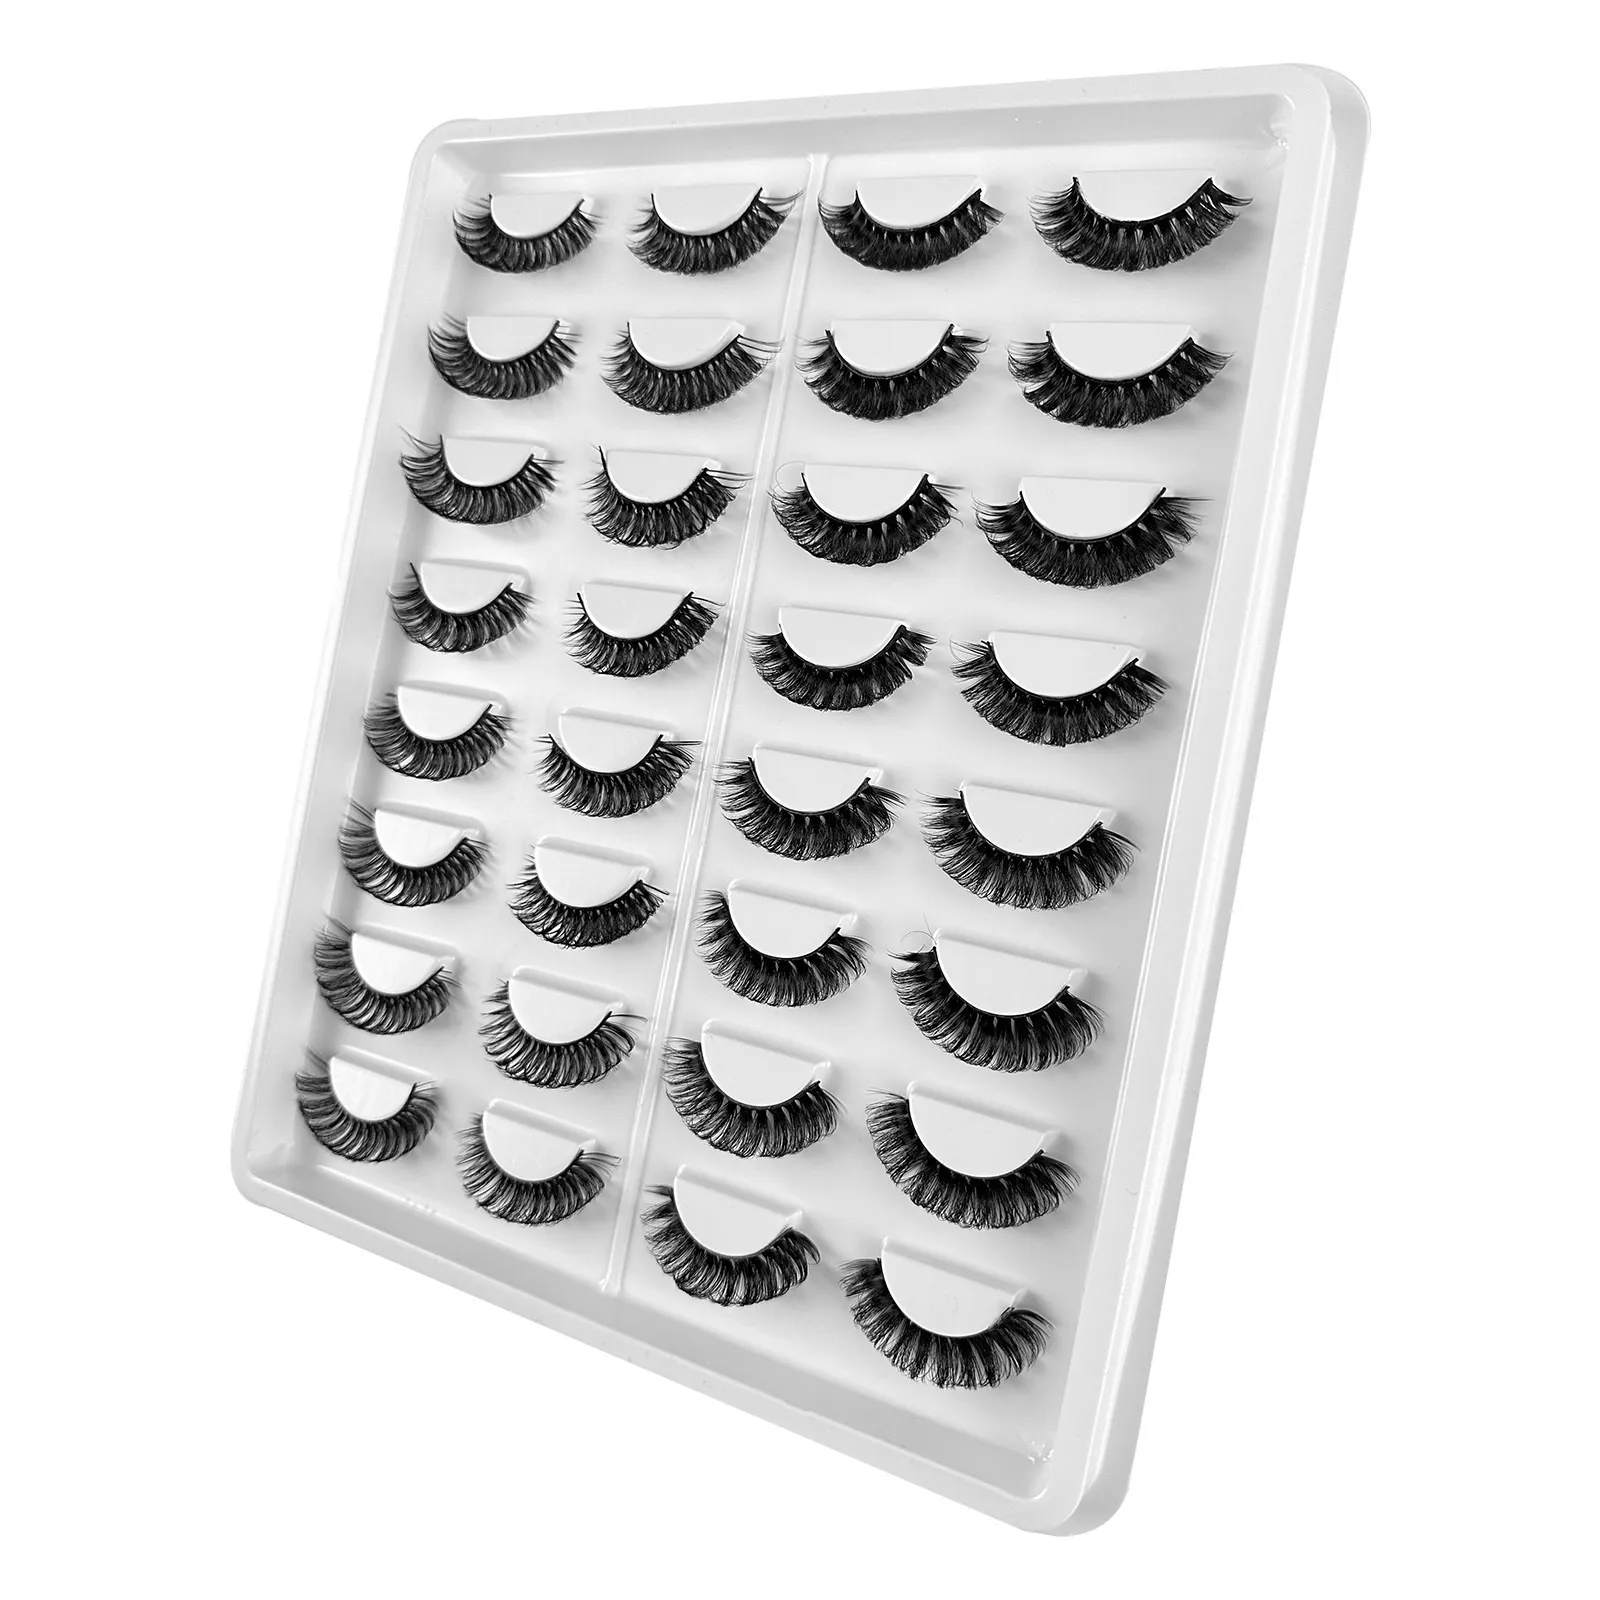 Multilayer Thick False Eyelashes Extensions Naturally Soft & Deliate Handmade Reusable Curled Fake Lashes Mink Full Strip Lash